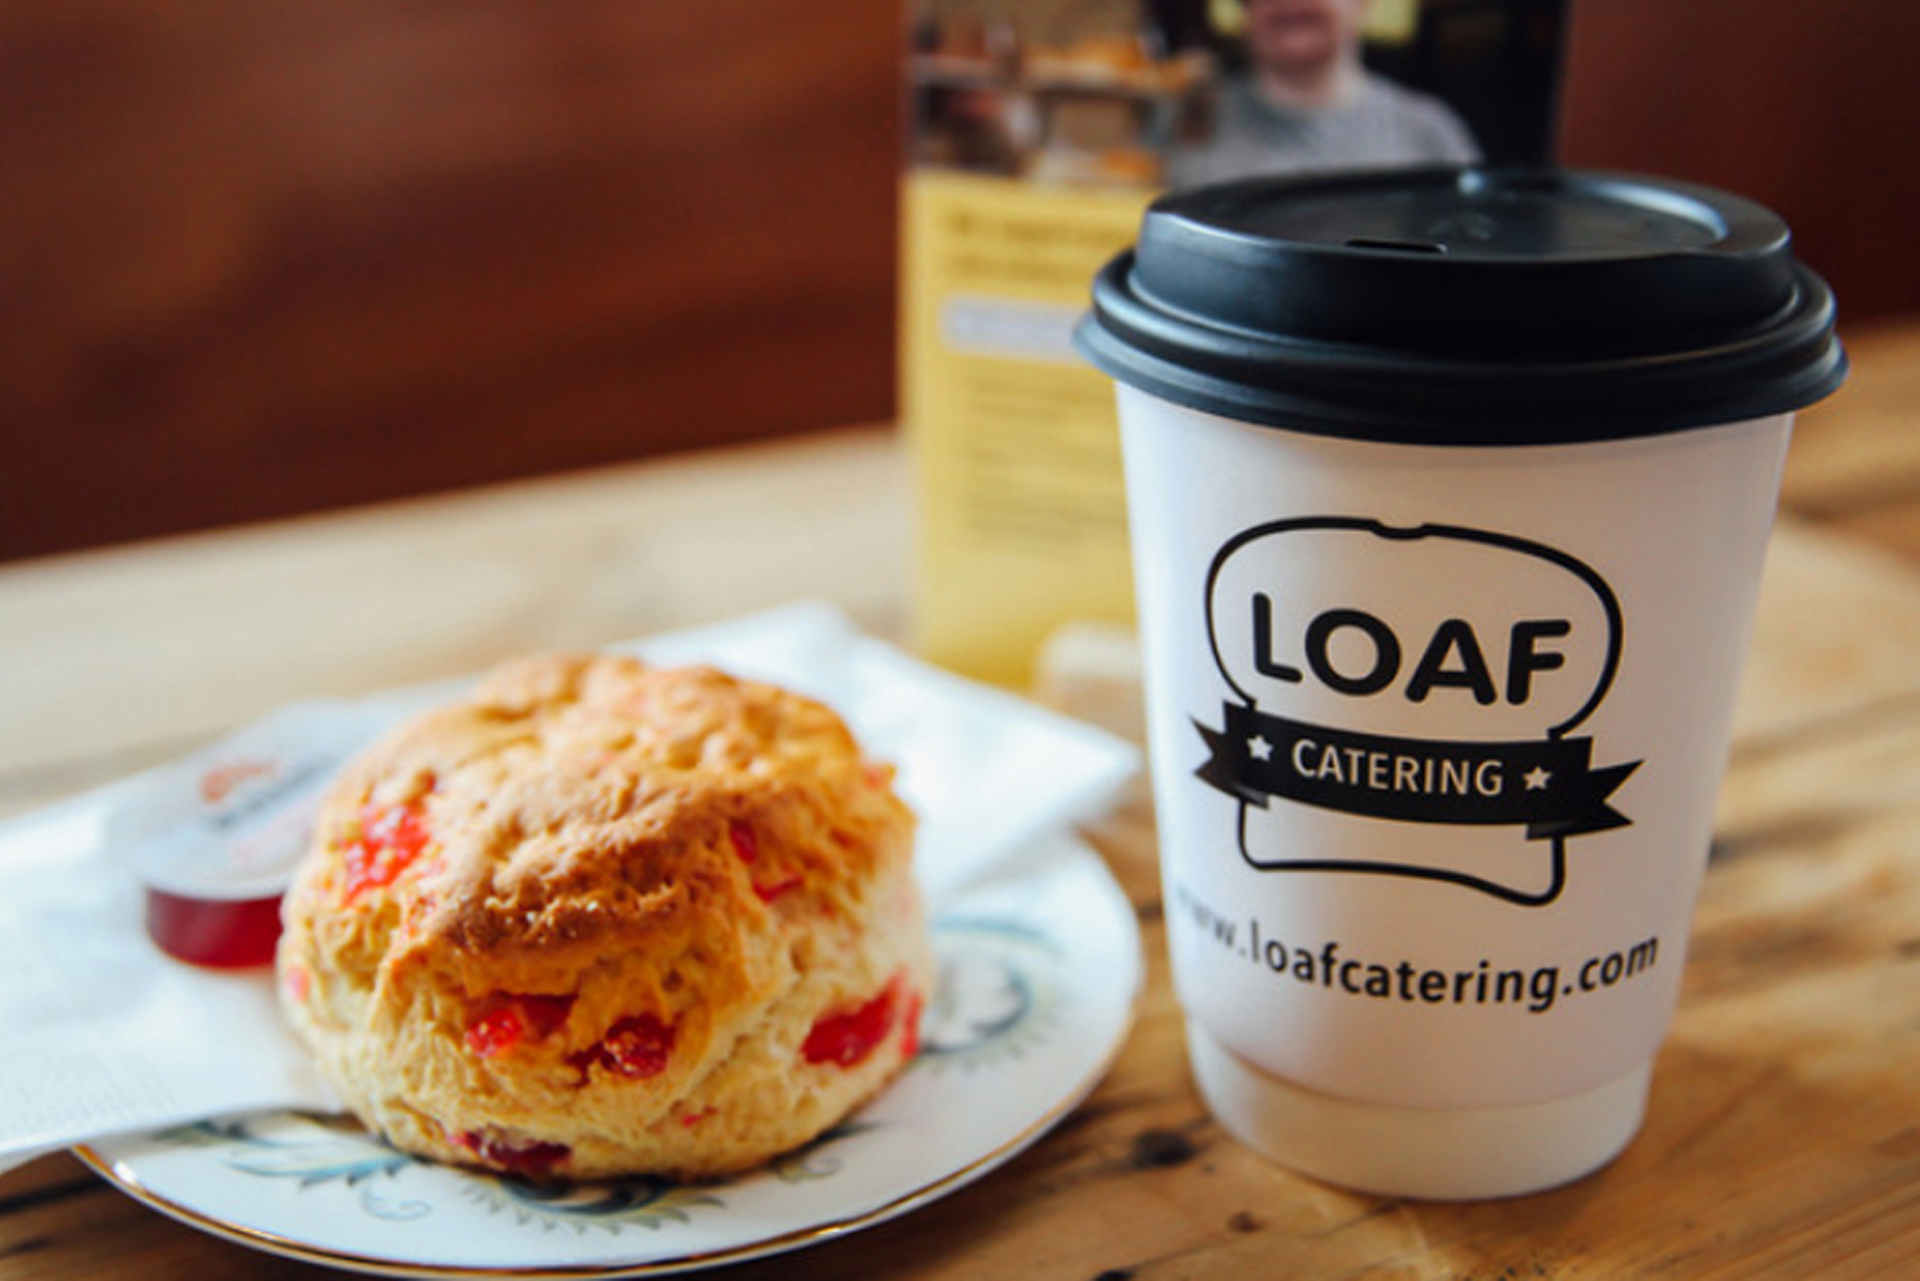 Loaf Catering, coffee & scone